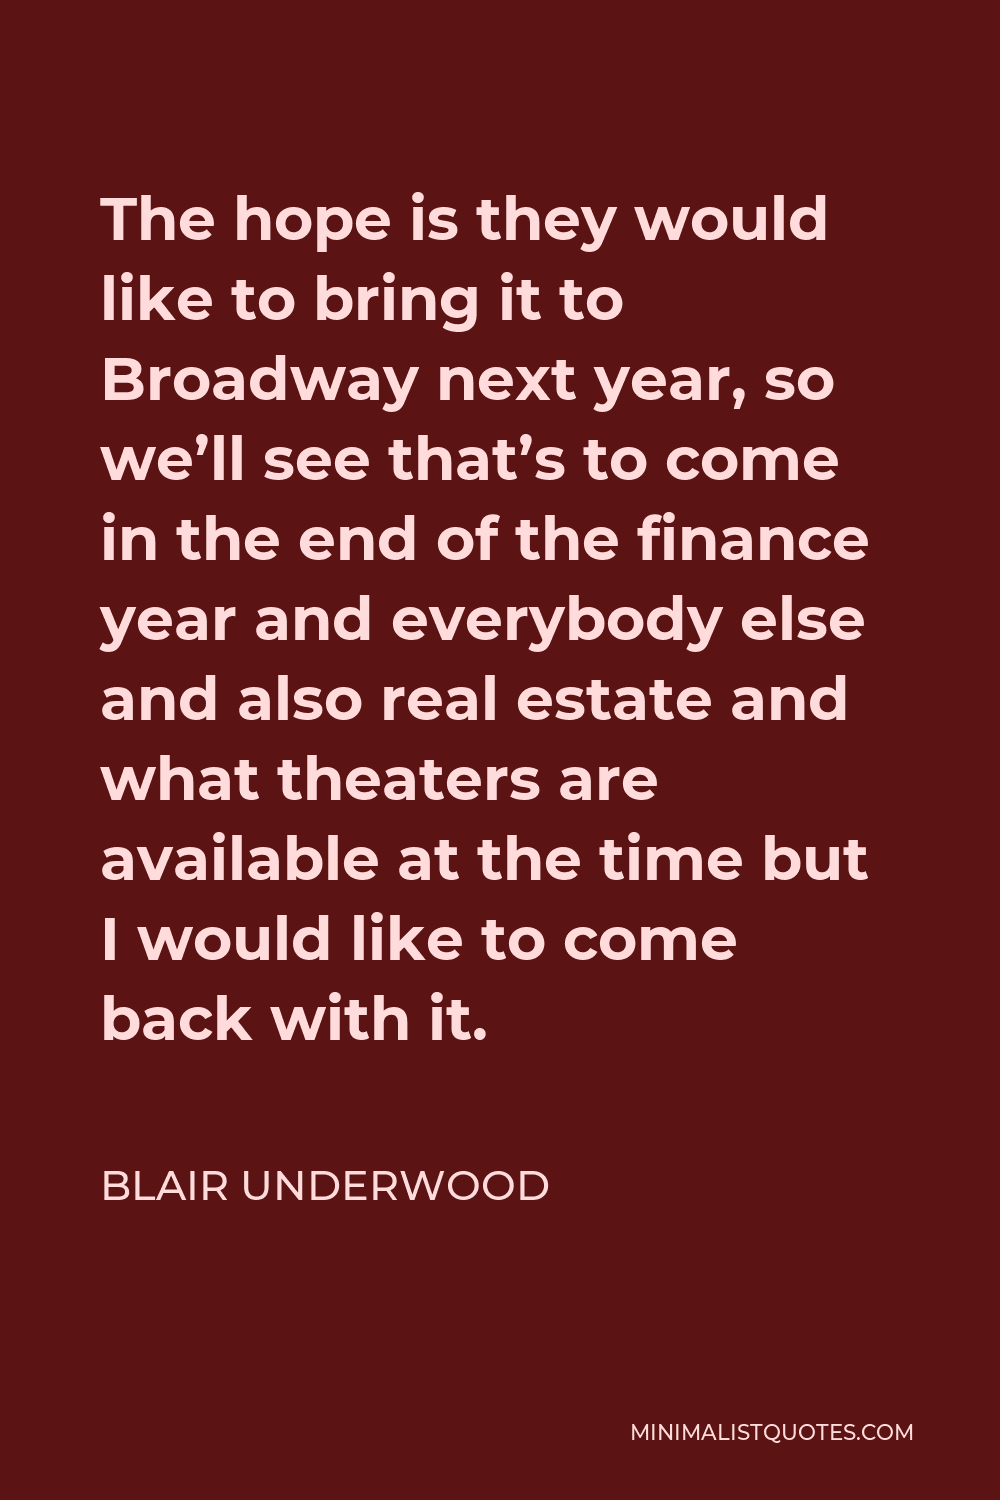 Blair Underwood Quote - The hope is they would like to bring it to Broadway next year, so we’ll see that’s to come in the end of the finance year and everybody else and also real estate and what theaters are available at the time but I would like to come back with it.